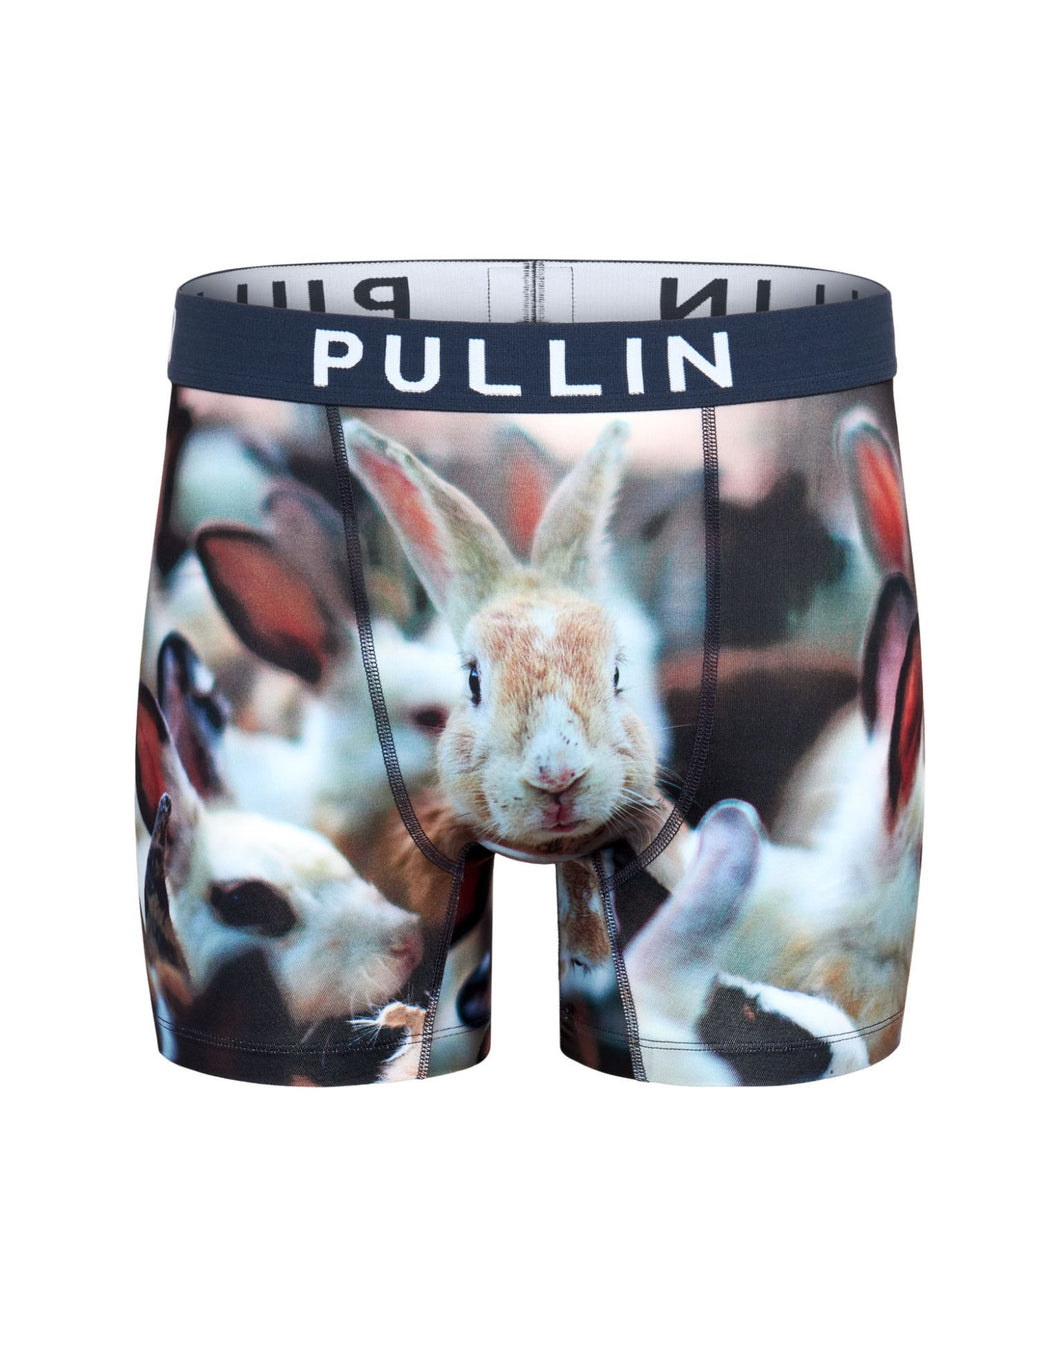 Boxer Pull In Fashion 2 Bunny